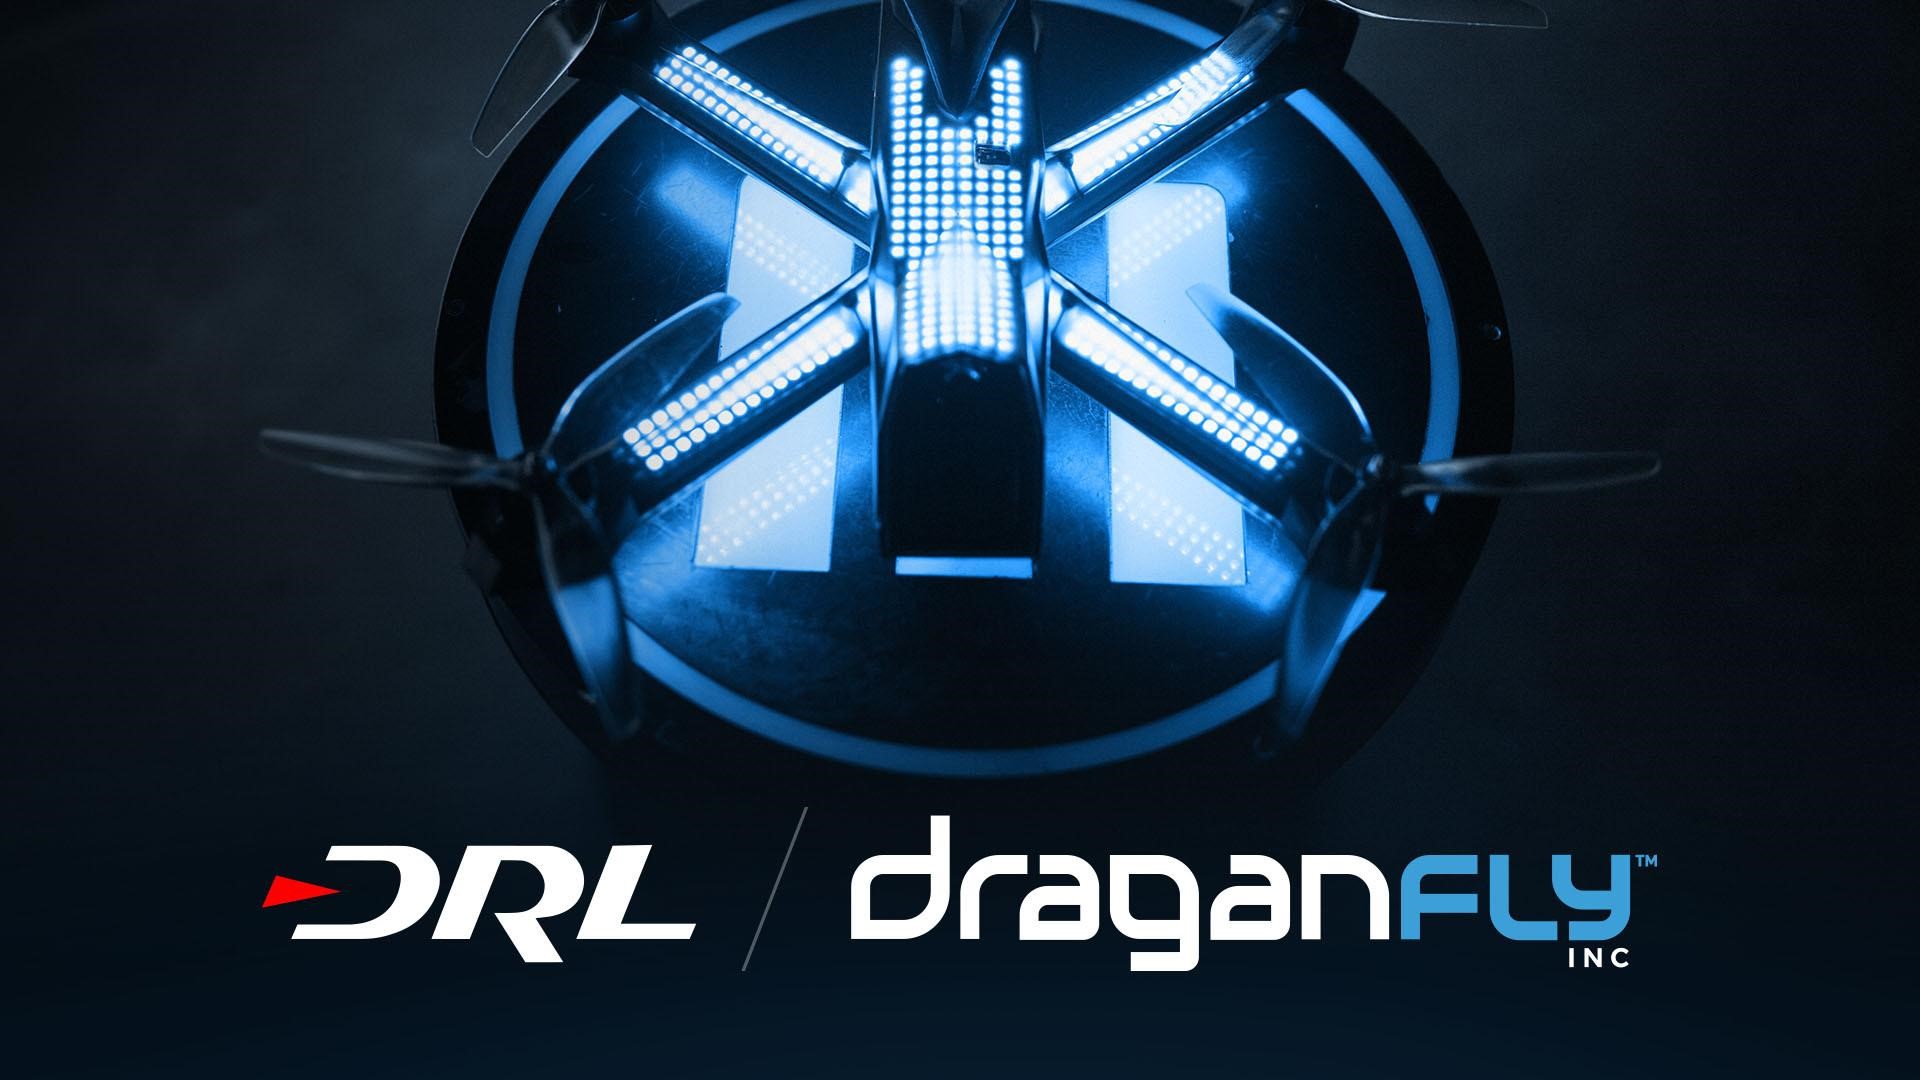 Draganfly, a global UAV leader, partners with DRL to advance drone racing and humanitarian aid through new groundbreaking technology